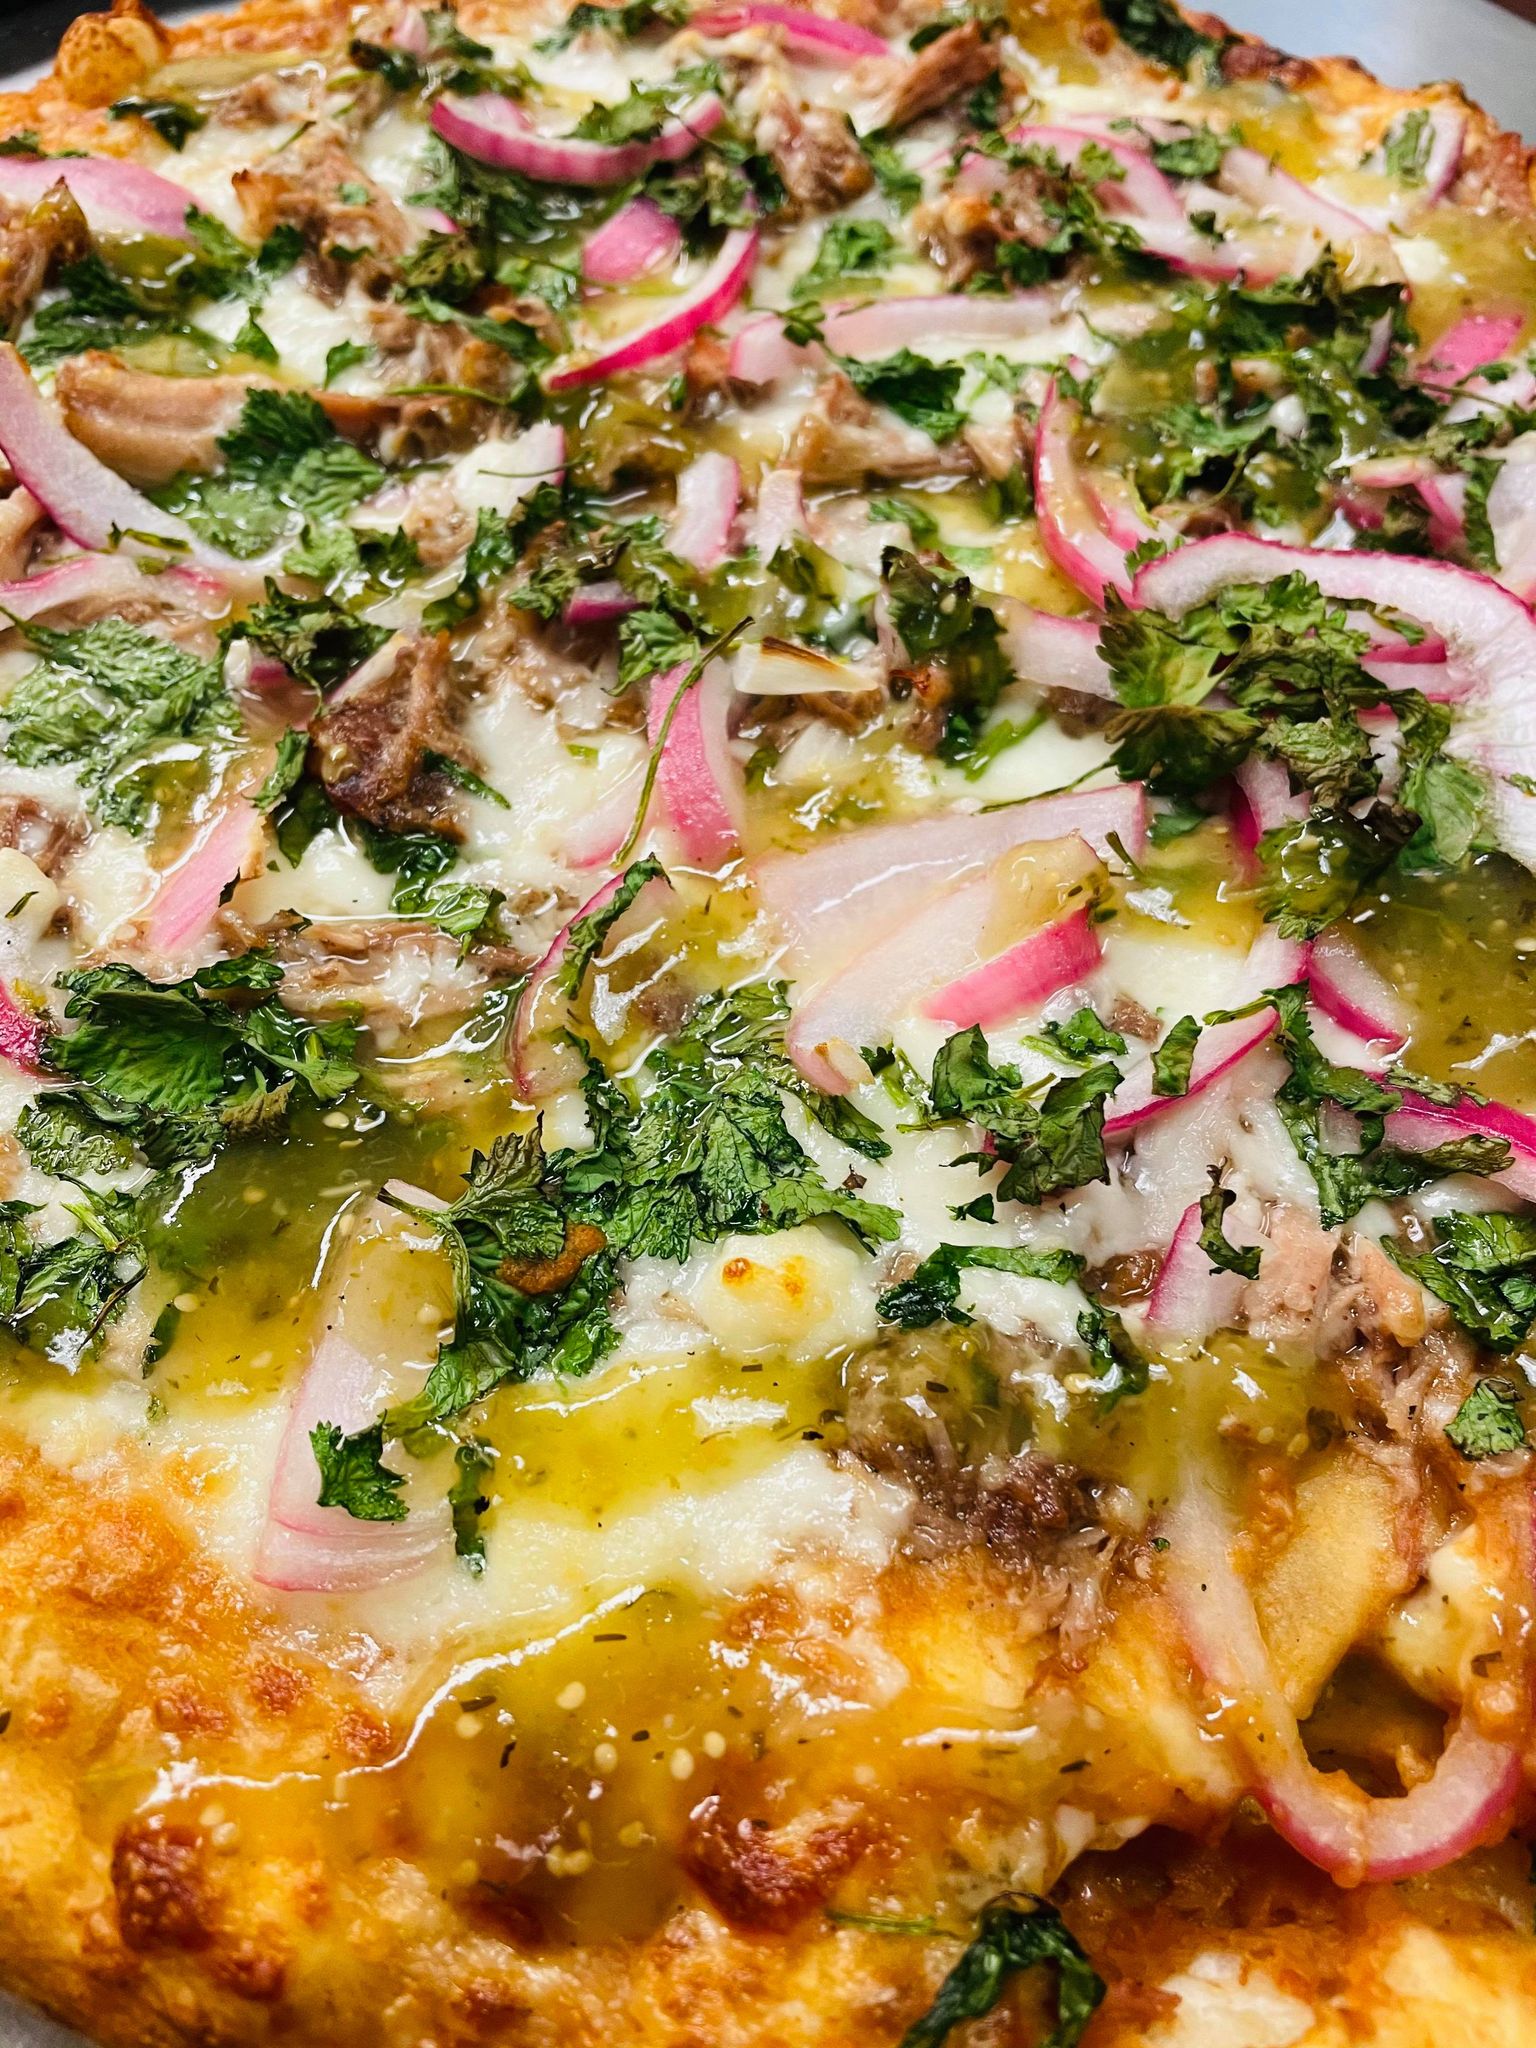 Always cooked to perfection - Carnitas Pizza - QC Pizza Mahtomedi MN.